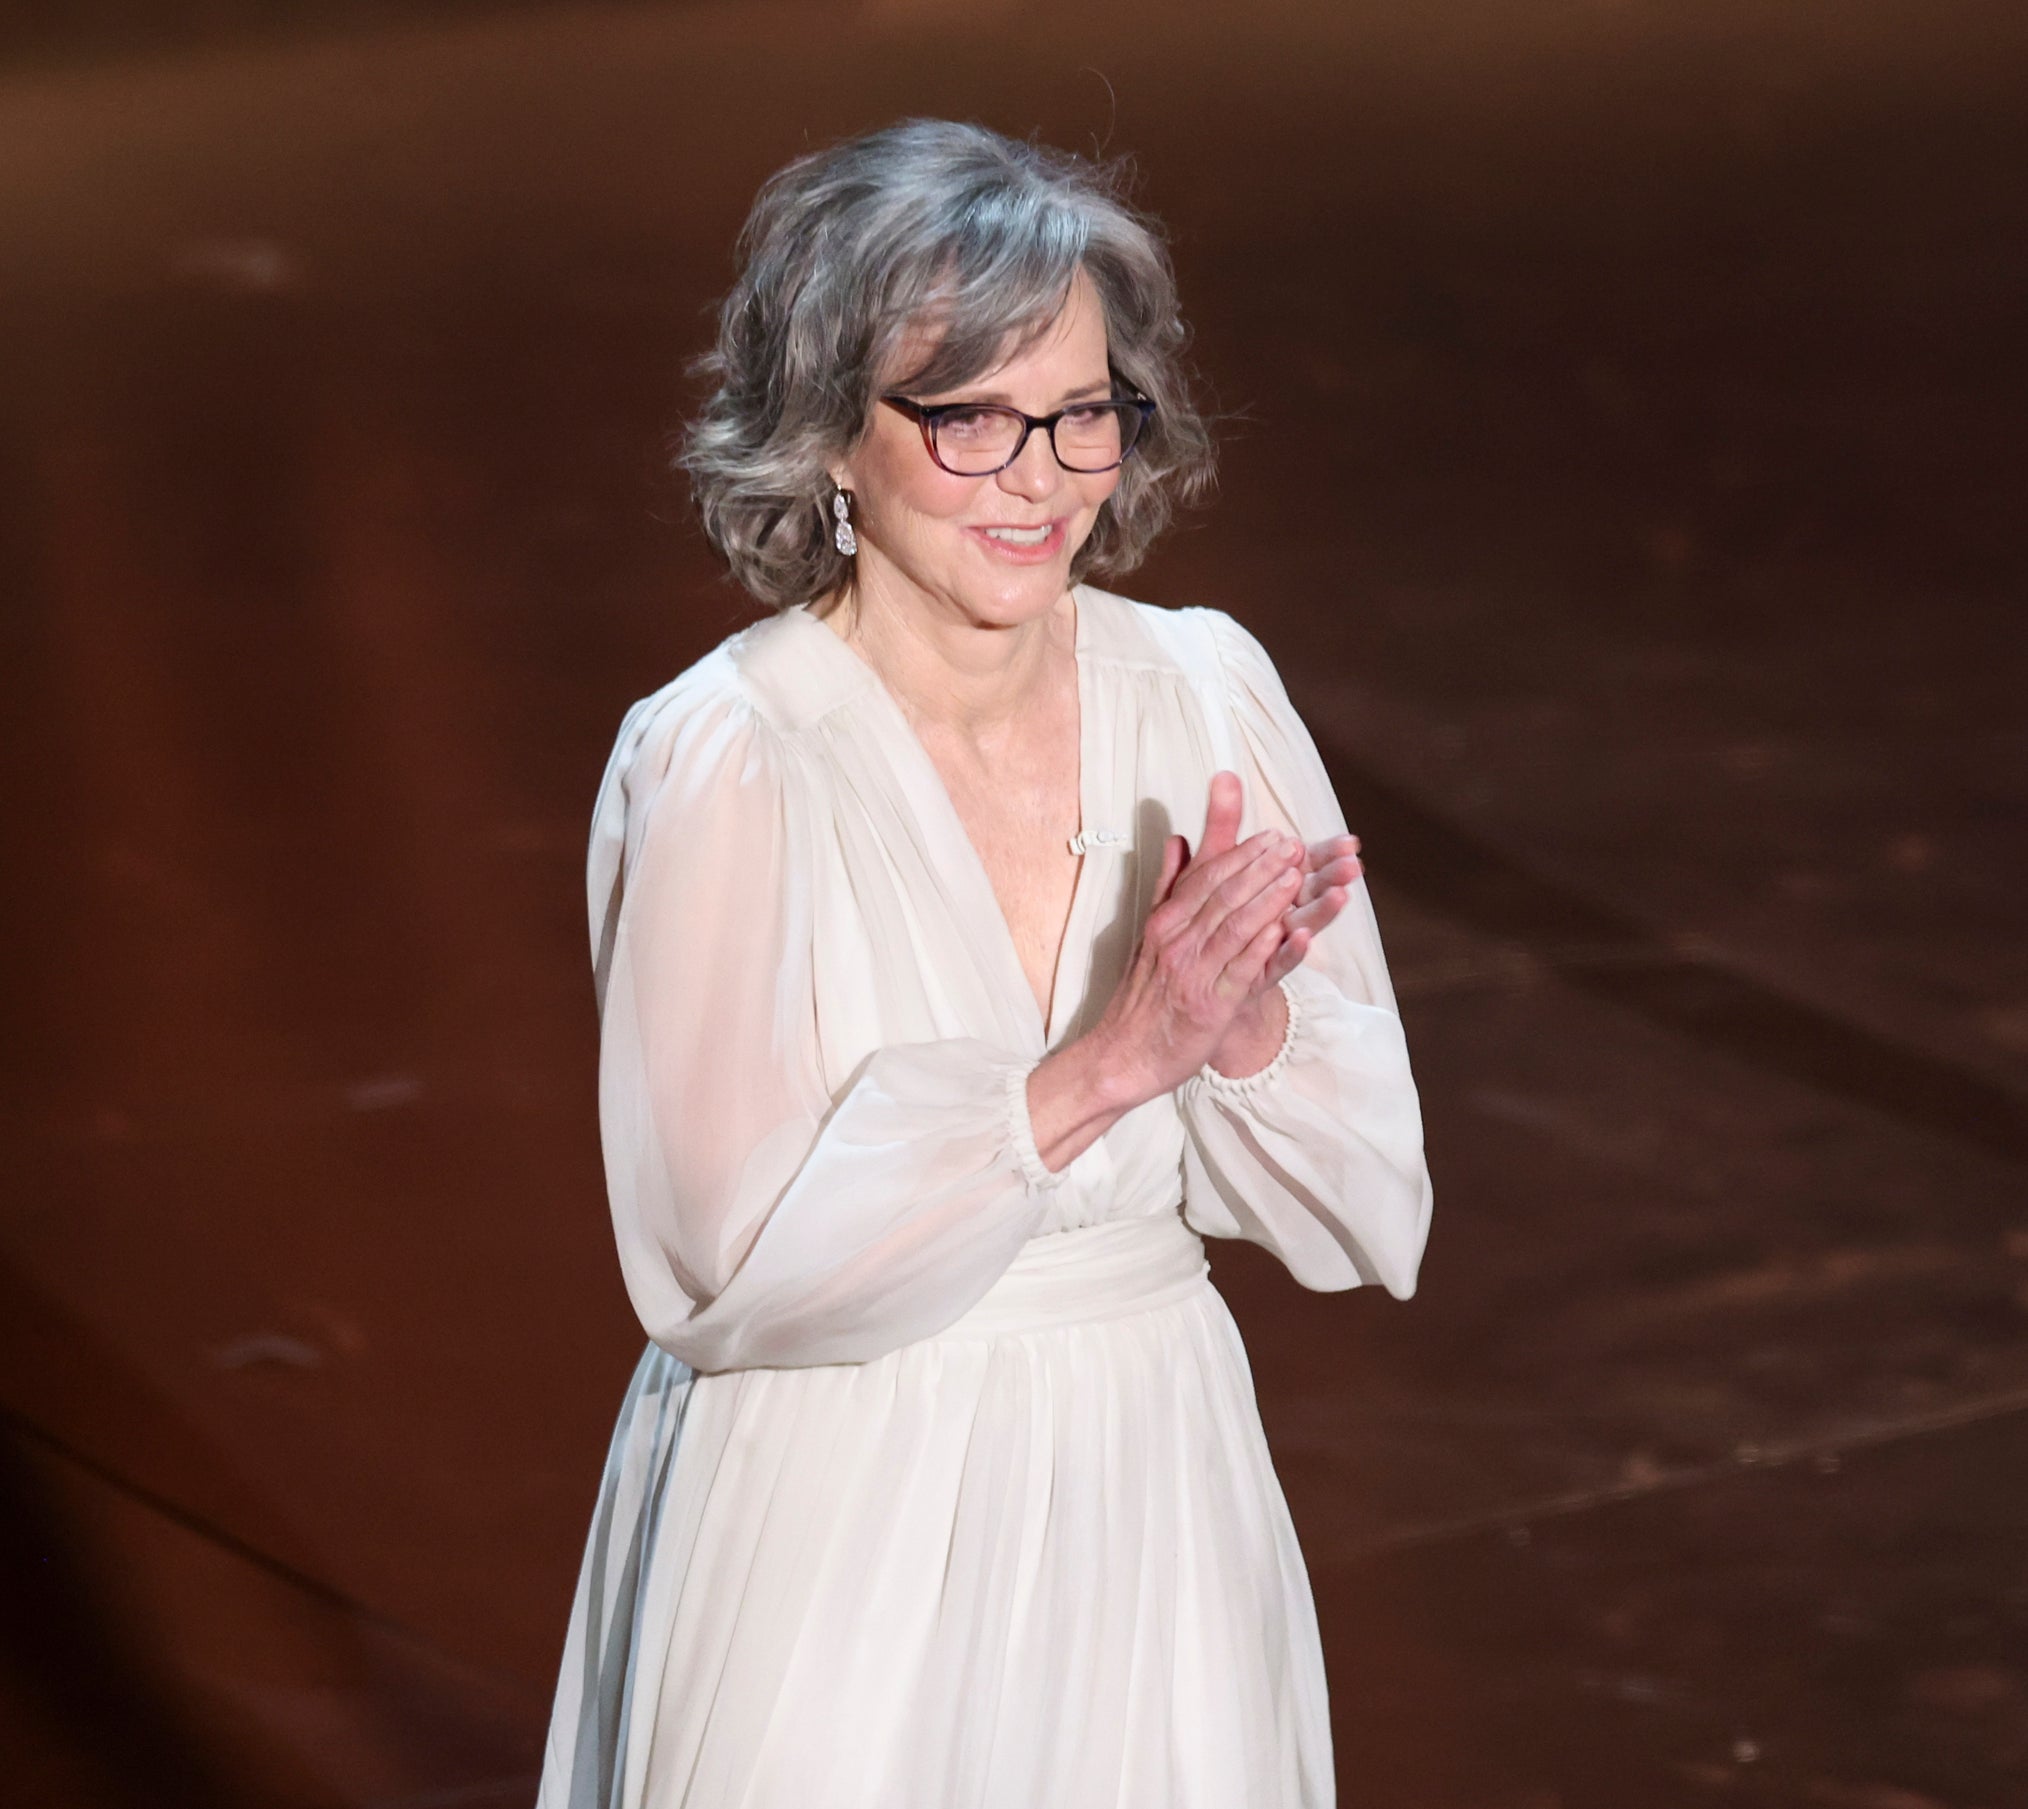 Sally Field stands clapping, wearing a v-neck dress with billowing sleeves